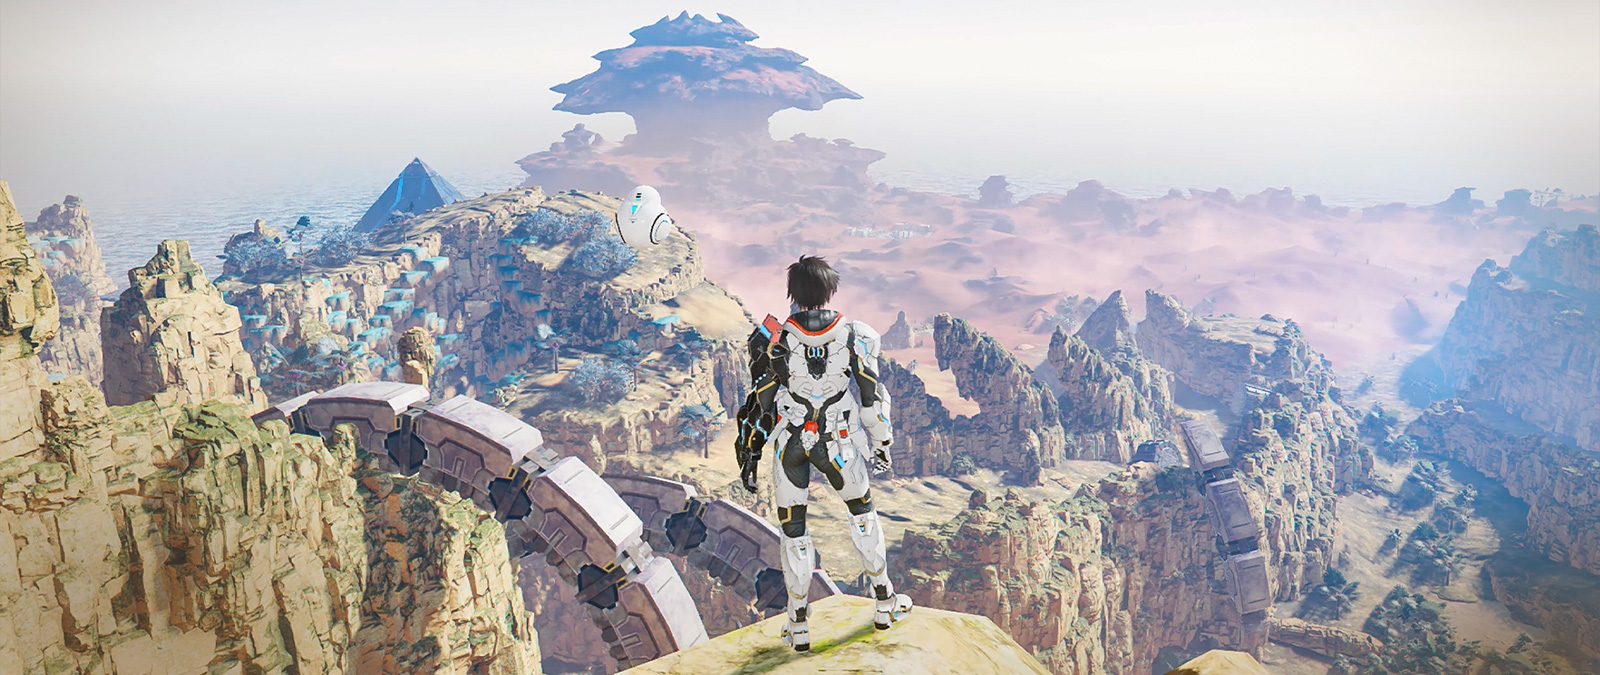 A character wearing power armor stands on a clifftop looking over a valley.